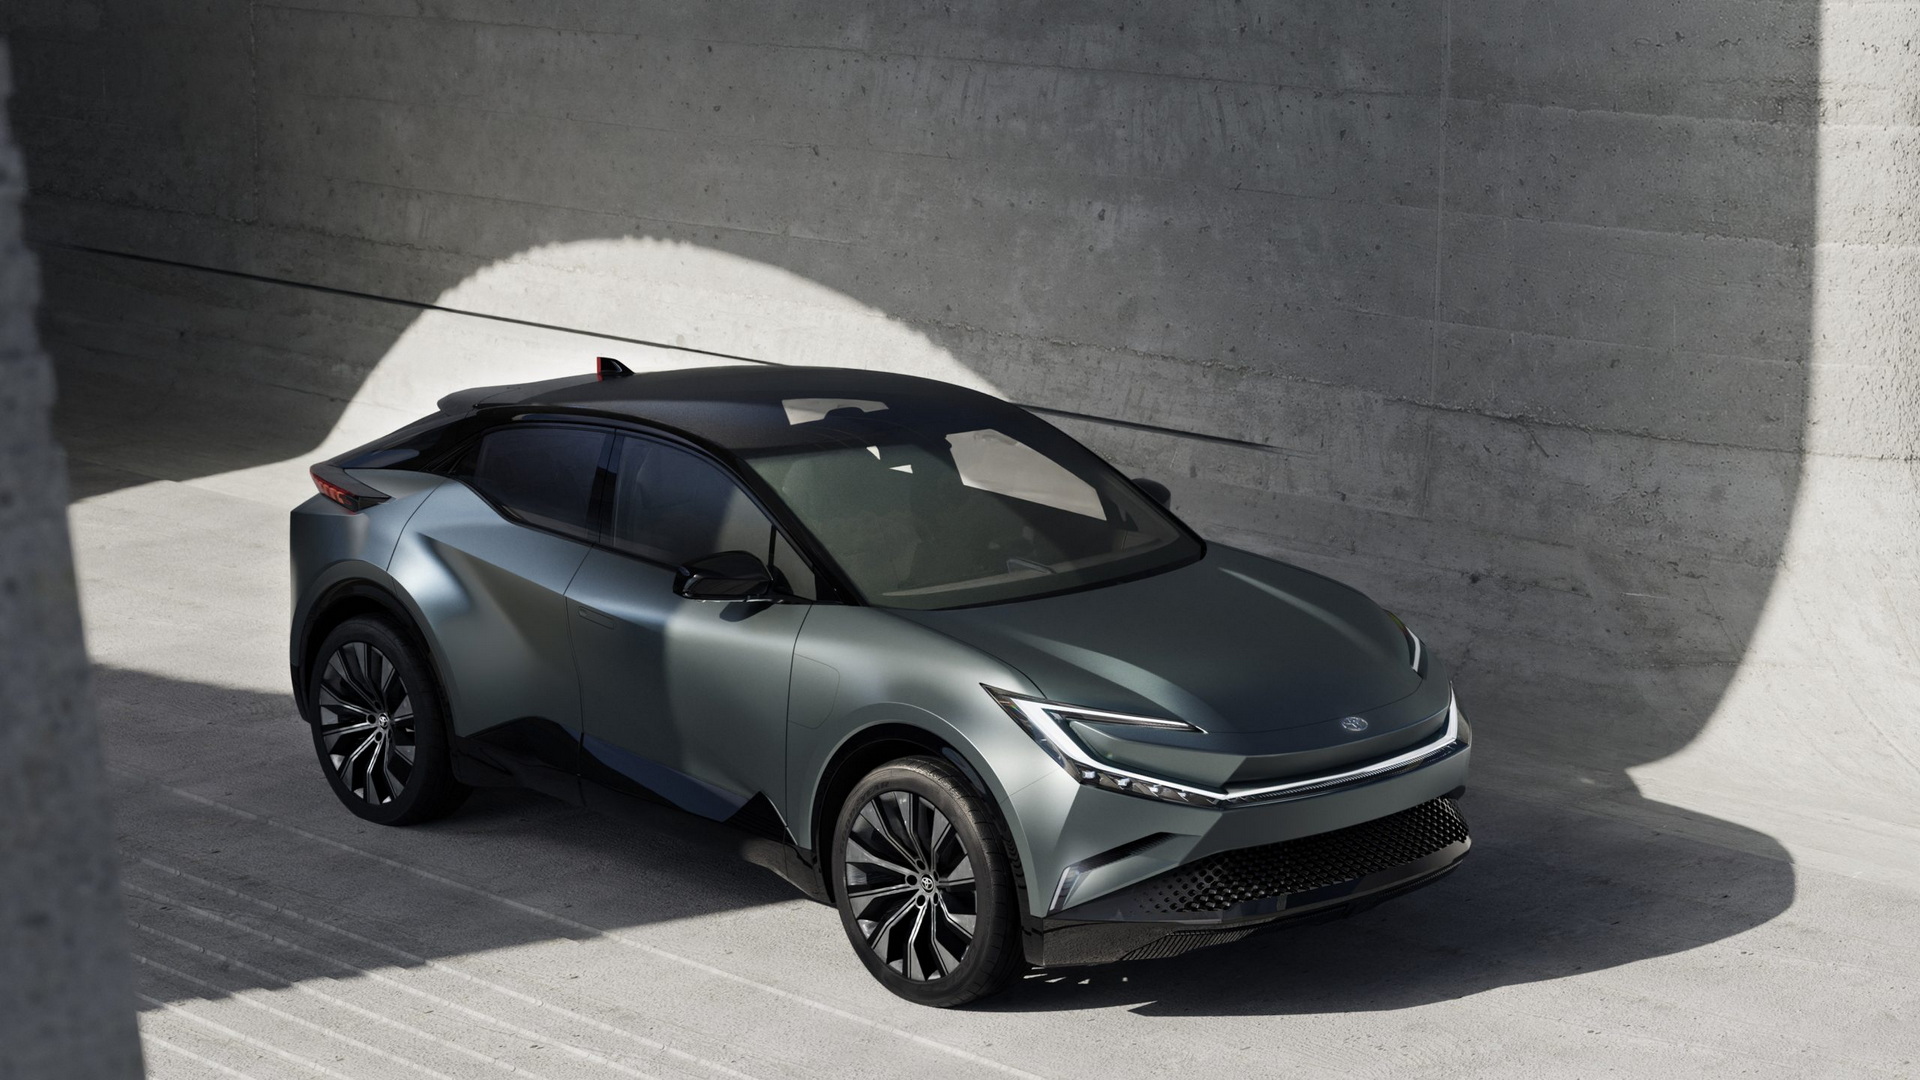 Toyota bZ Compact SUV Concept Brings EyeCatching Styling To Europe